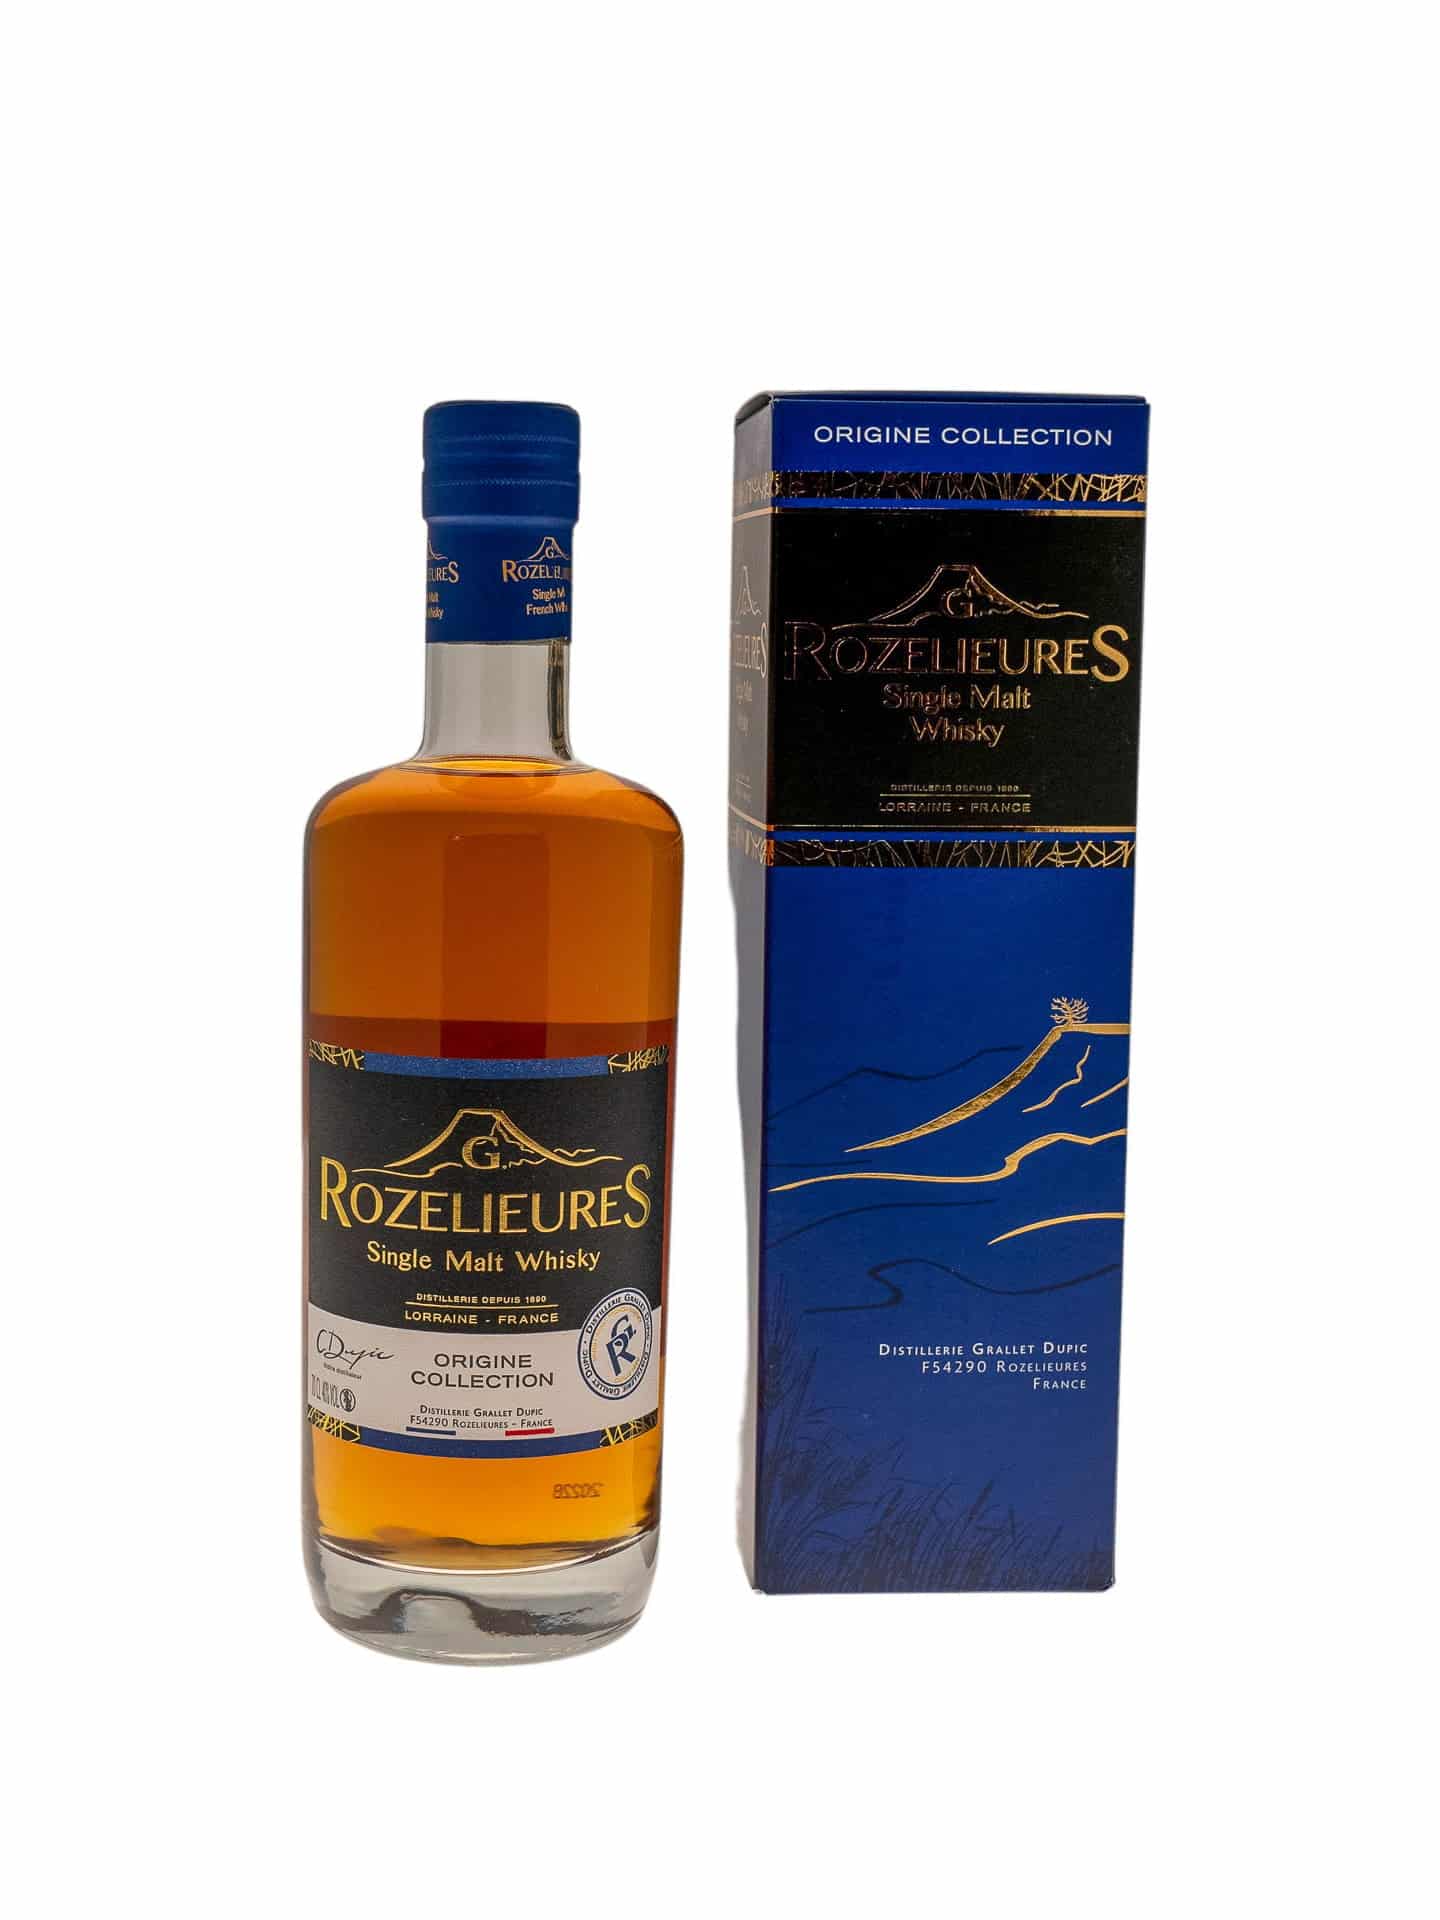 whisky-rozelieures-collection-origine